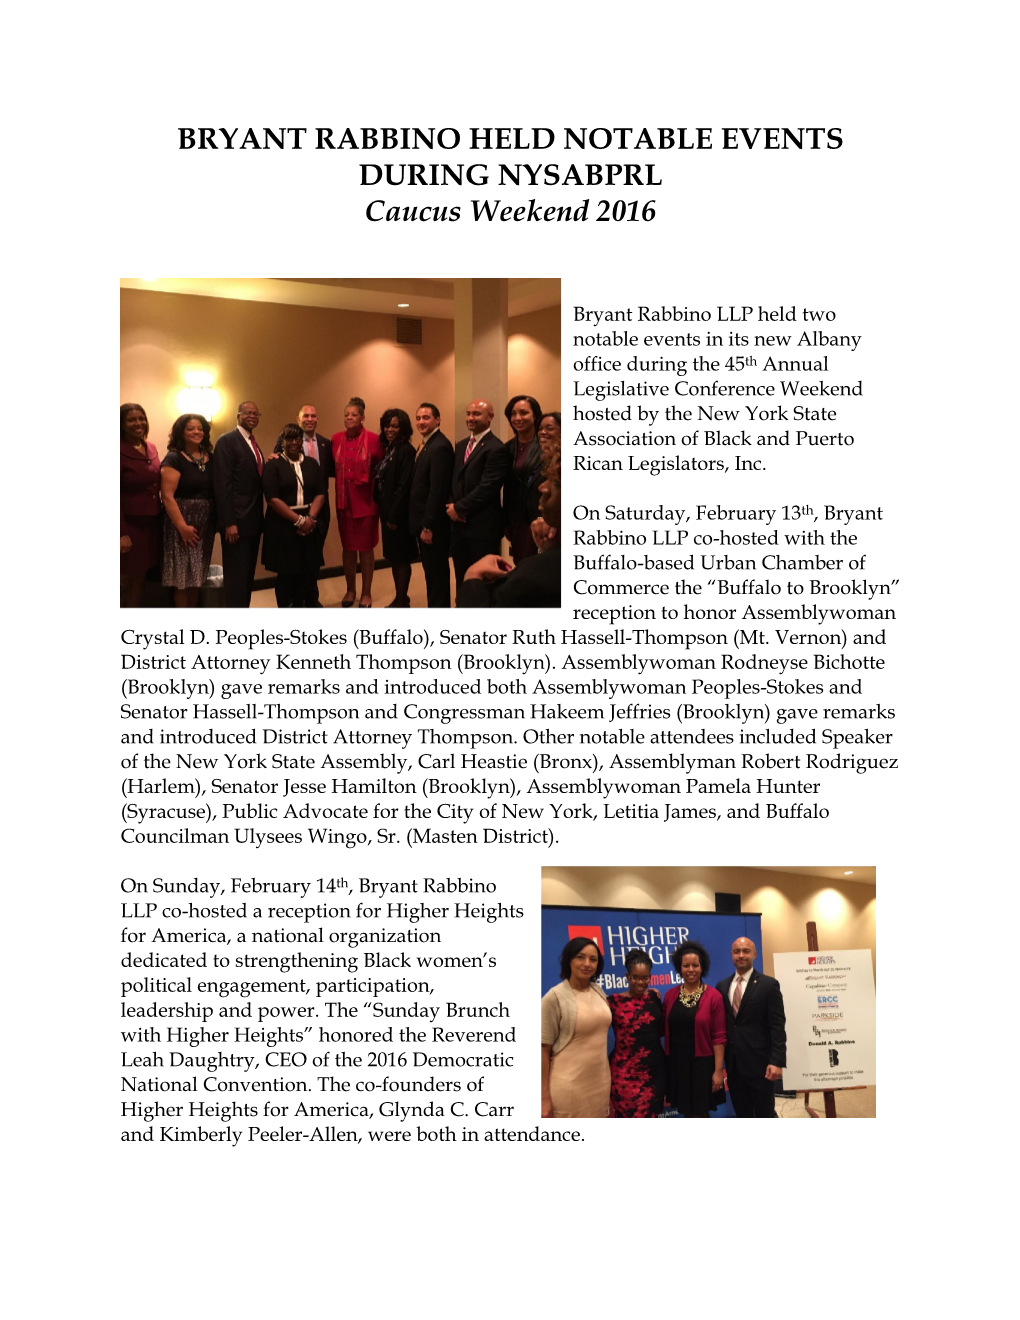 BRYANT RABBINO HELD NOTABLE EVENTS DURING NYSABPRL Caucus Weekend 2016